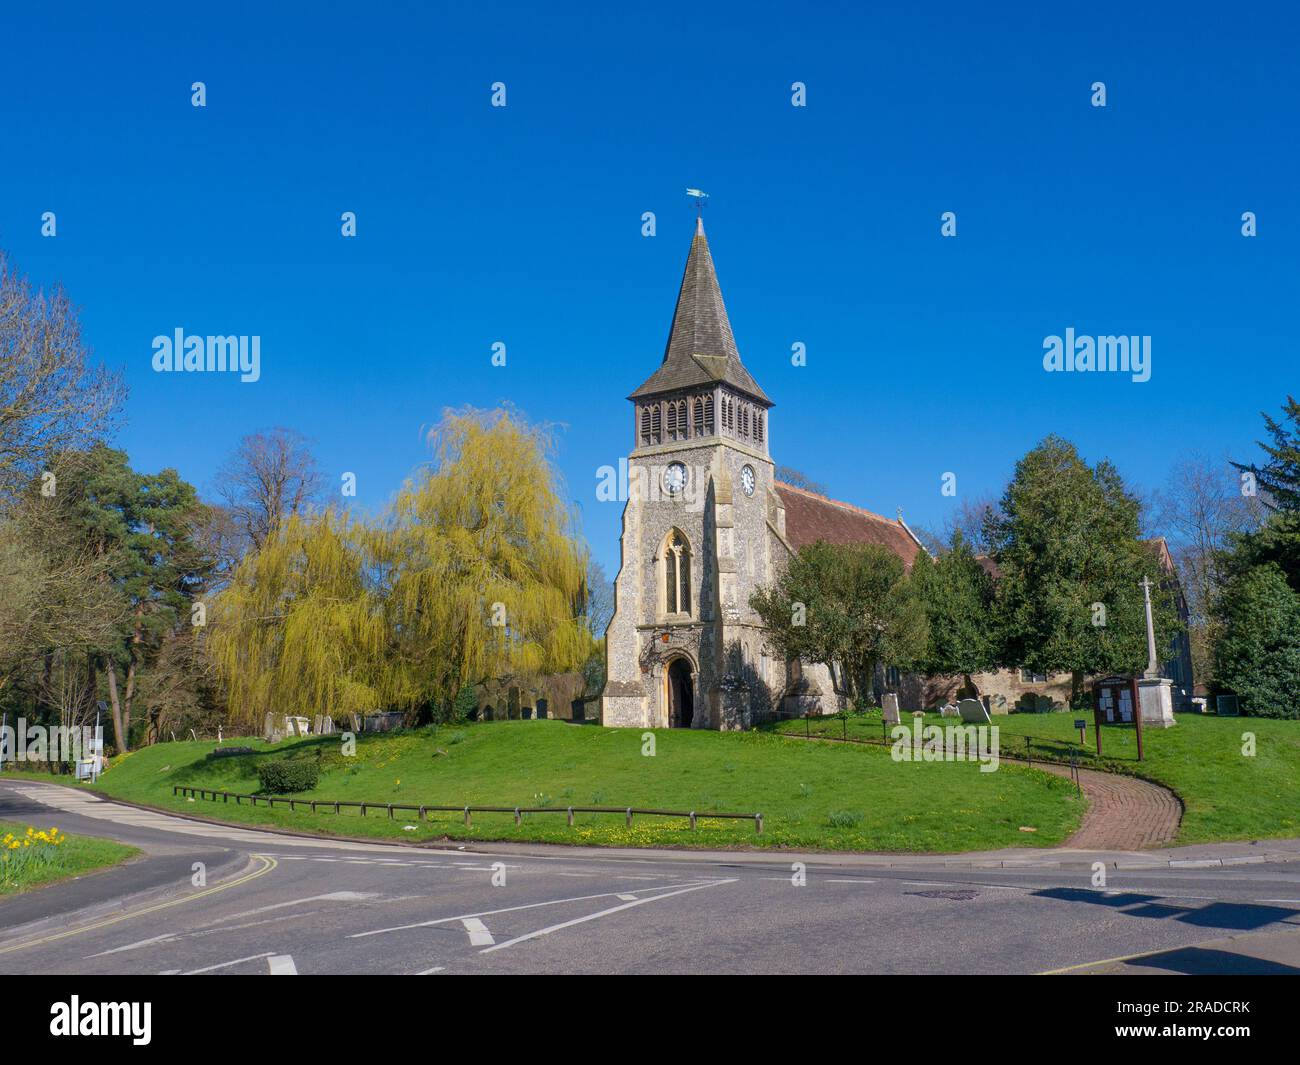 St Nicholas Church ,Wickham,Hampshire.The church is a striking example of a building on a large, almost circular, mound, which had probably been sacre Stock Photo